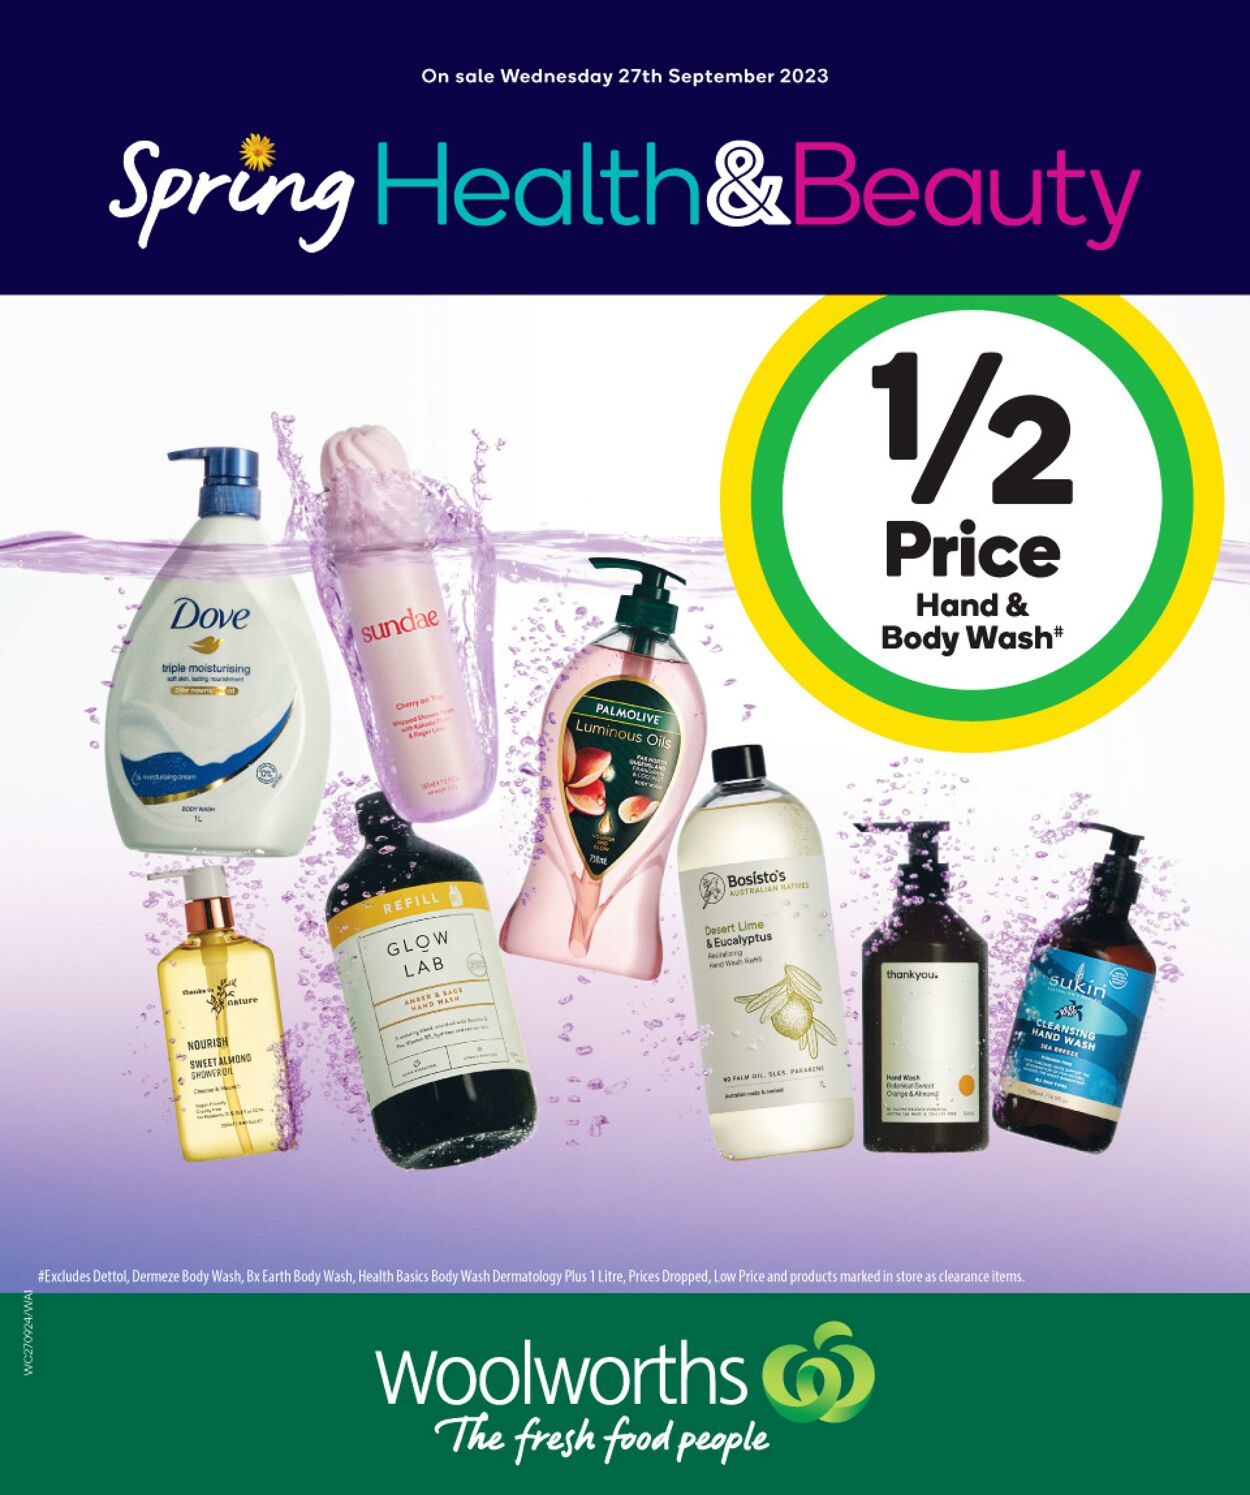 Catalogue Woolworths - Spring Health & Beauty WA 27 Sep, 2023 - 3 Oct, 2023